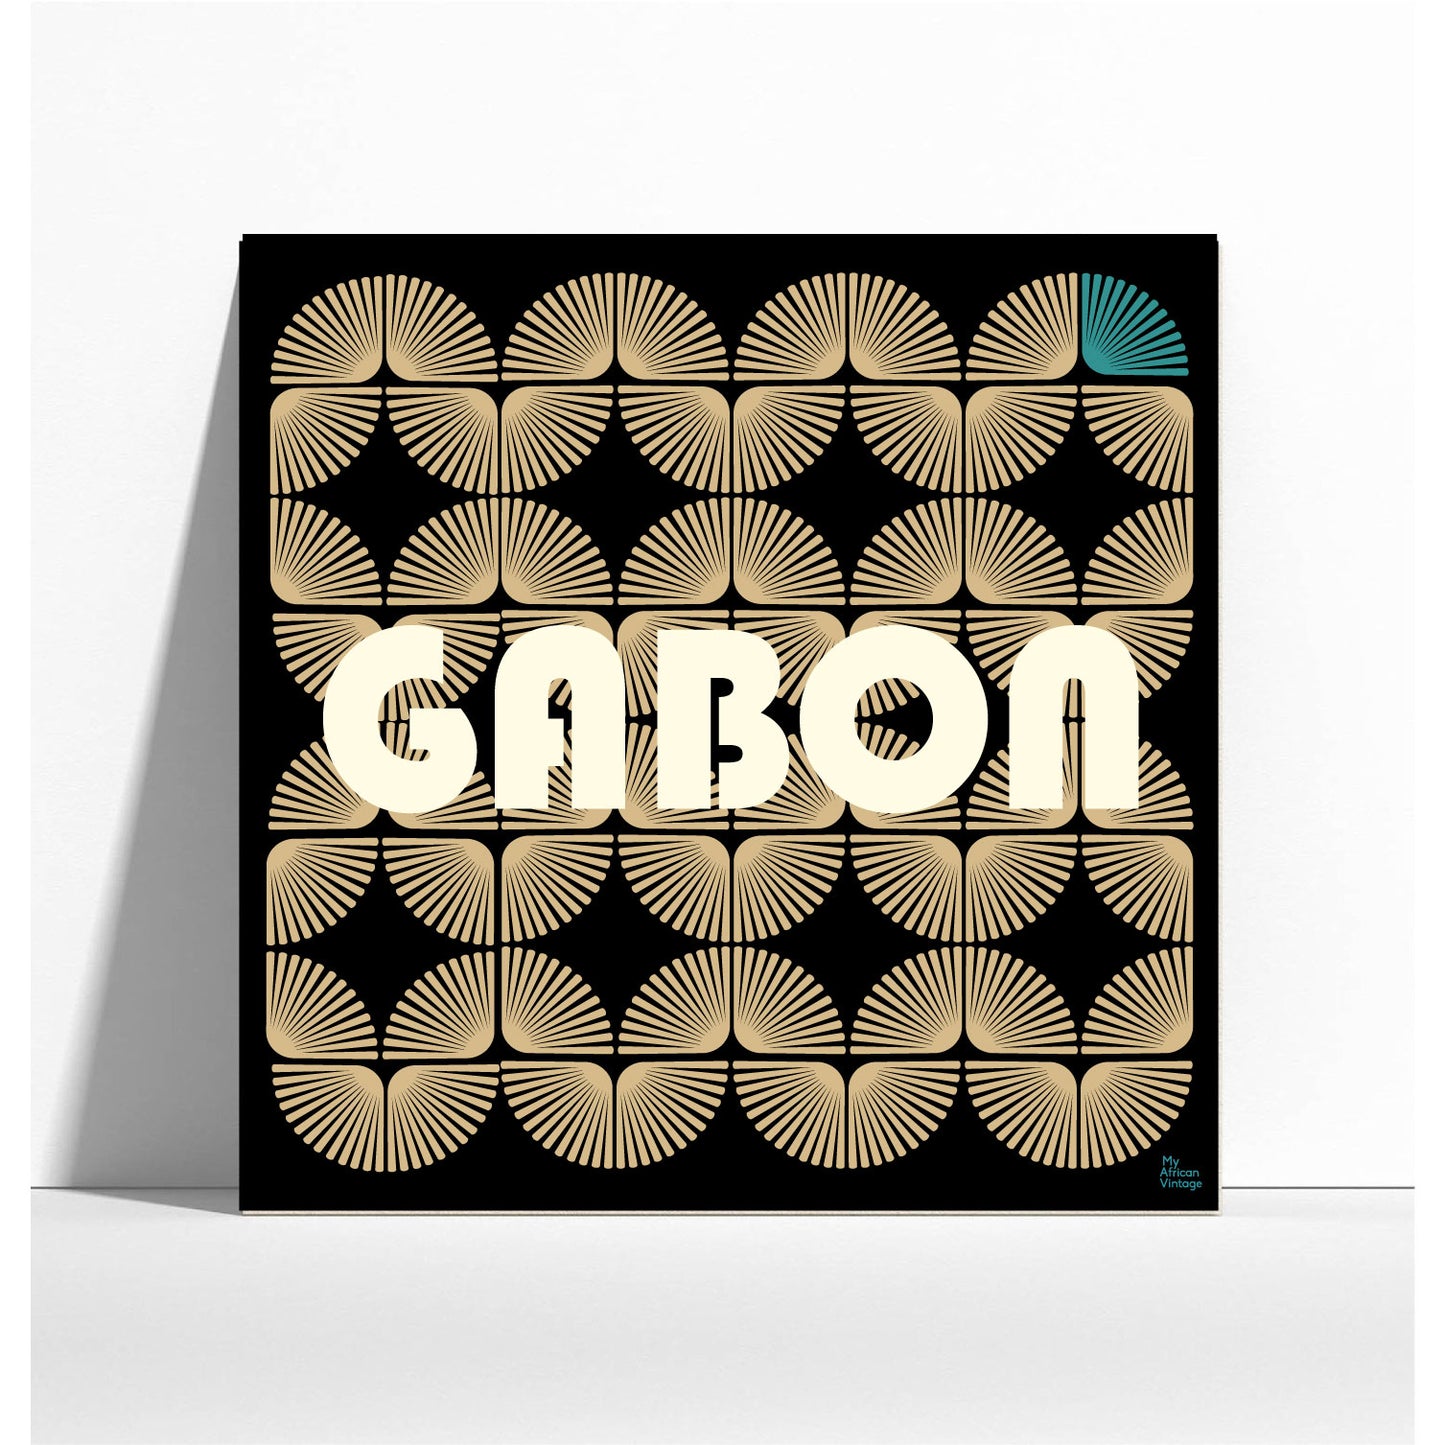 "Gabon" retro style poster - "My African Vintage" collection